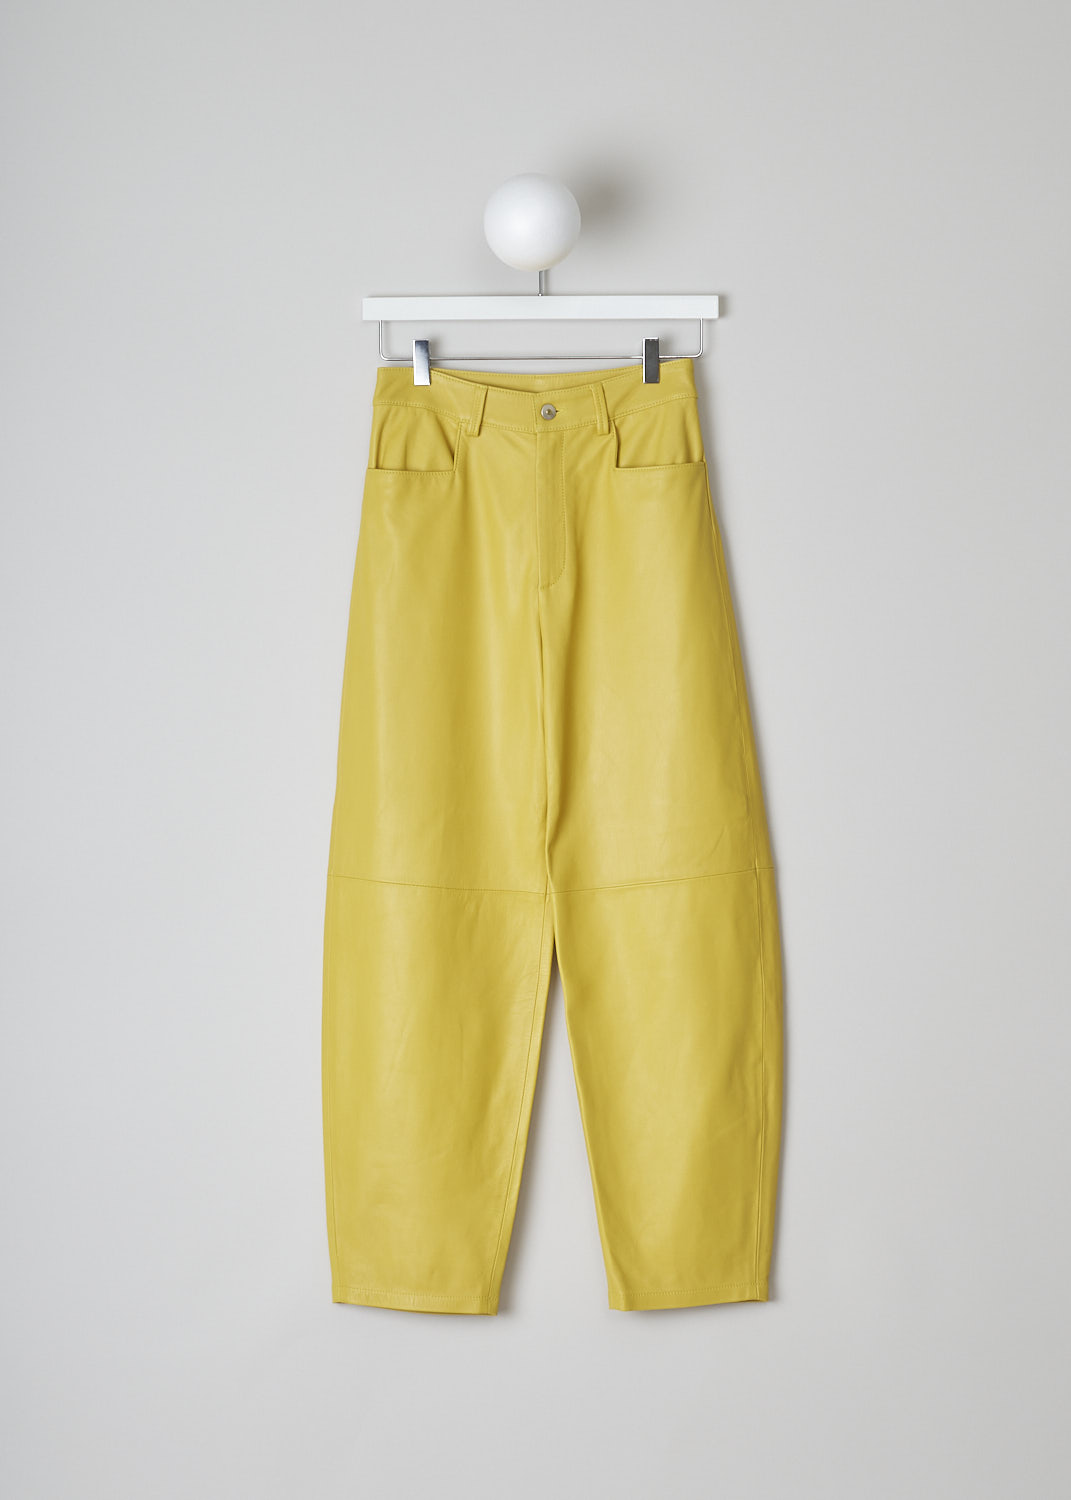 WANDLER, CHAMOMILE HOLIDAY PANTS, 22306_060301_1434_CHAMOMILE_HOLIDAY, Yellow, Front, These yellow leather Chamomile pants have a waistband with belt loops and a button and zip closure. The pants have a high-waisted fit. The balloon legs are cropped at the ankle. These pants have slanted pockets in the front and patch pockets in the back. 

